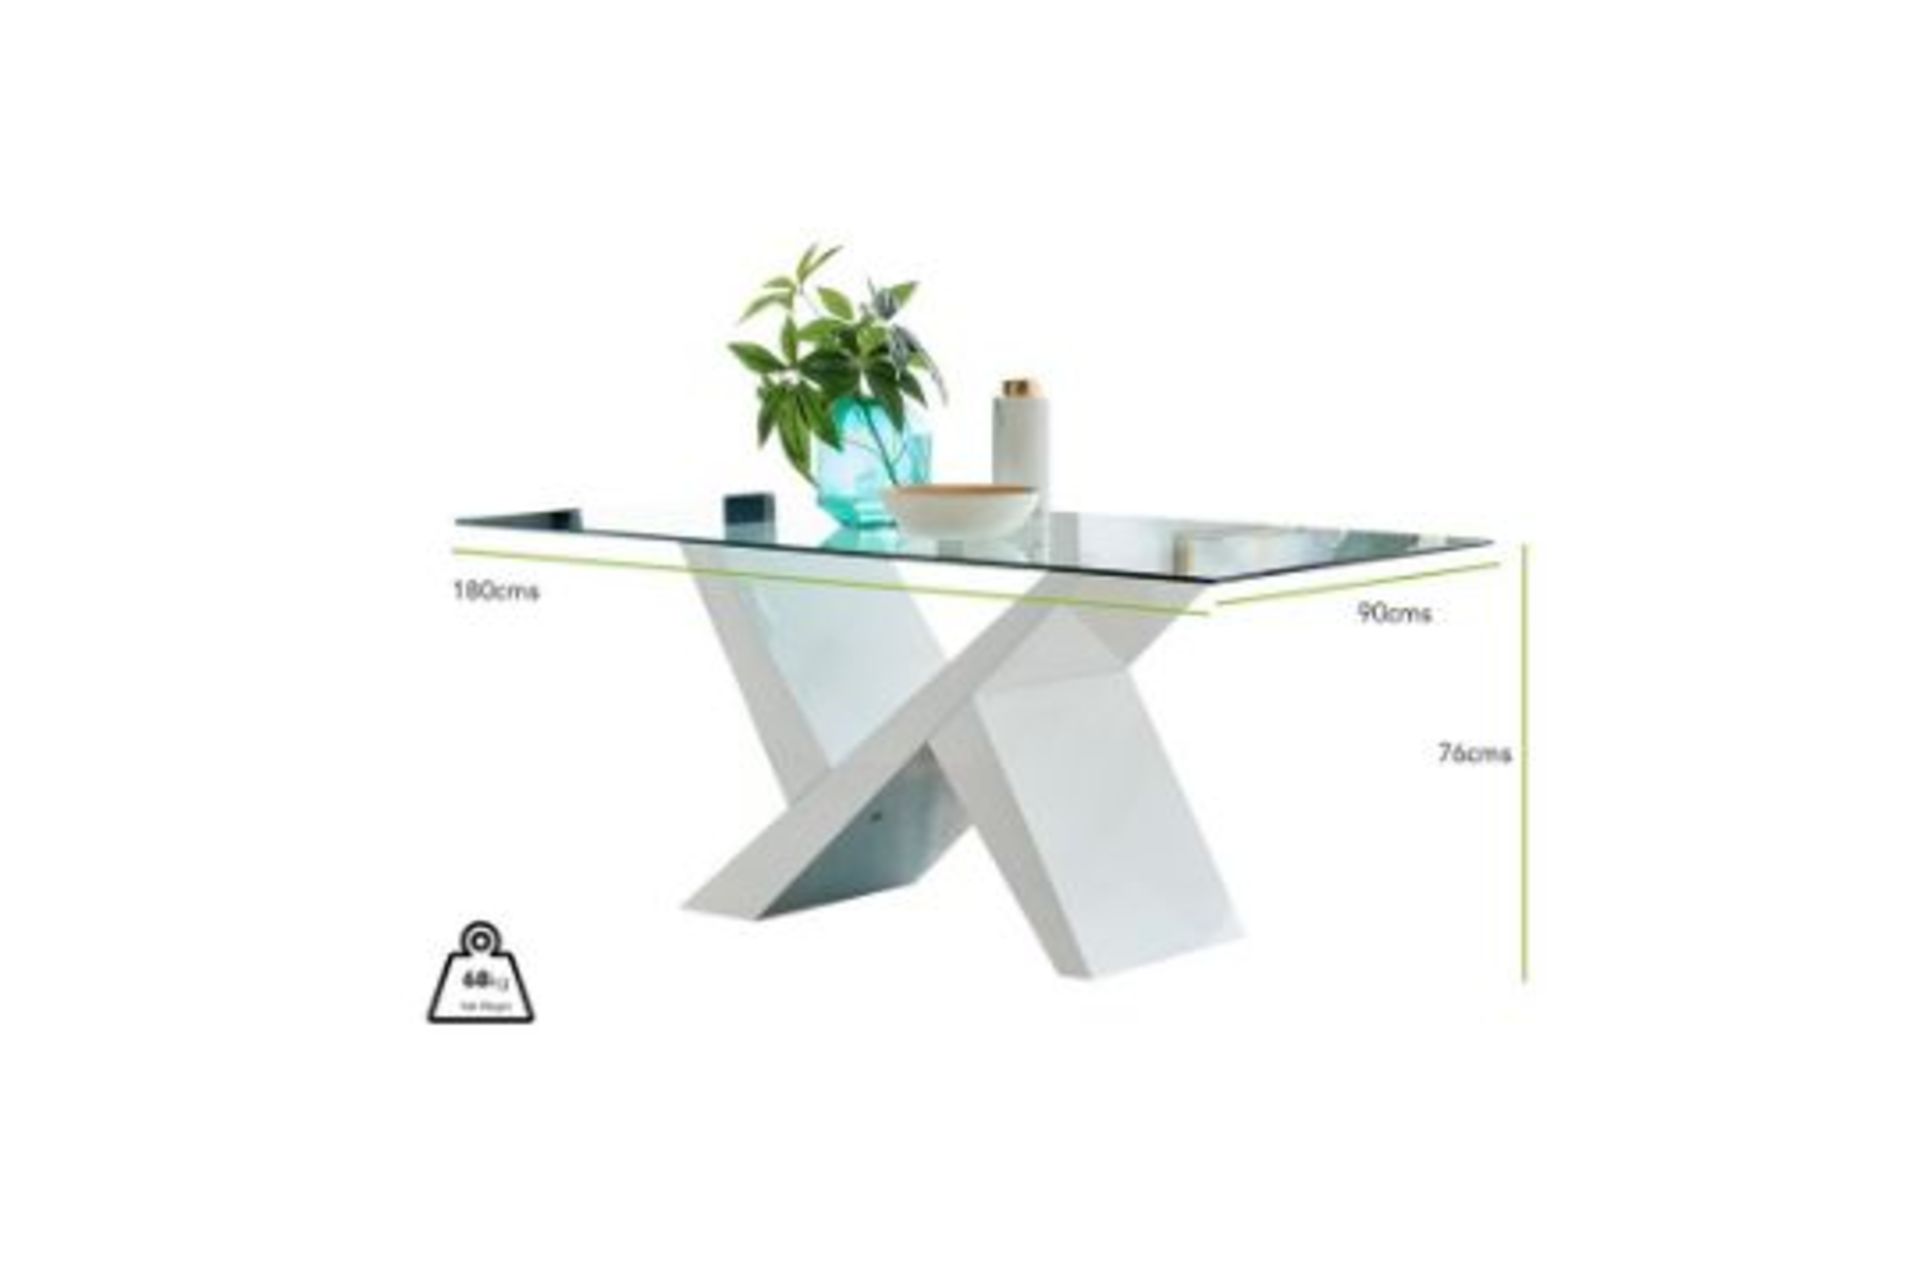 Eubanks Dining Table (Leg Colour Grey) RRP £529.99 - Image 2 of 2